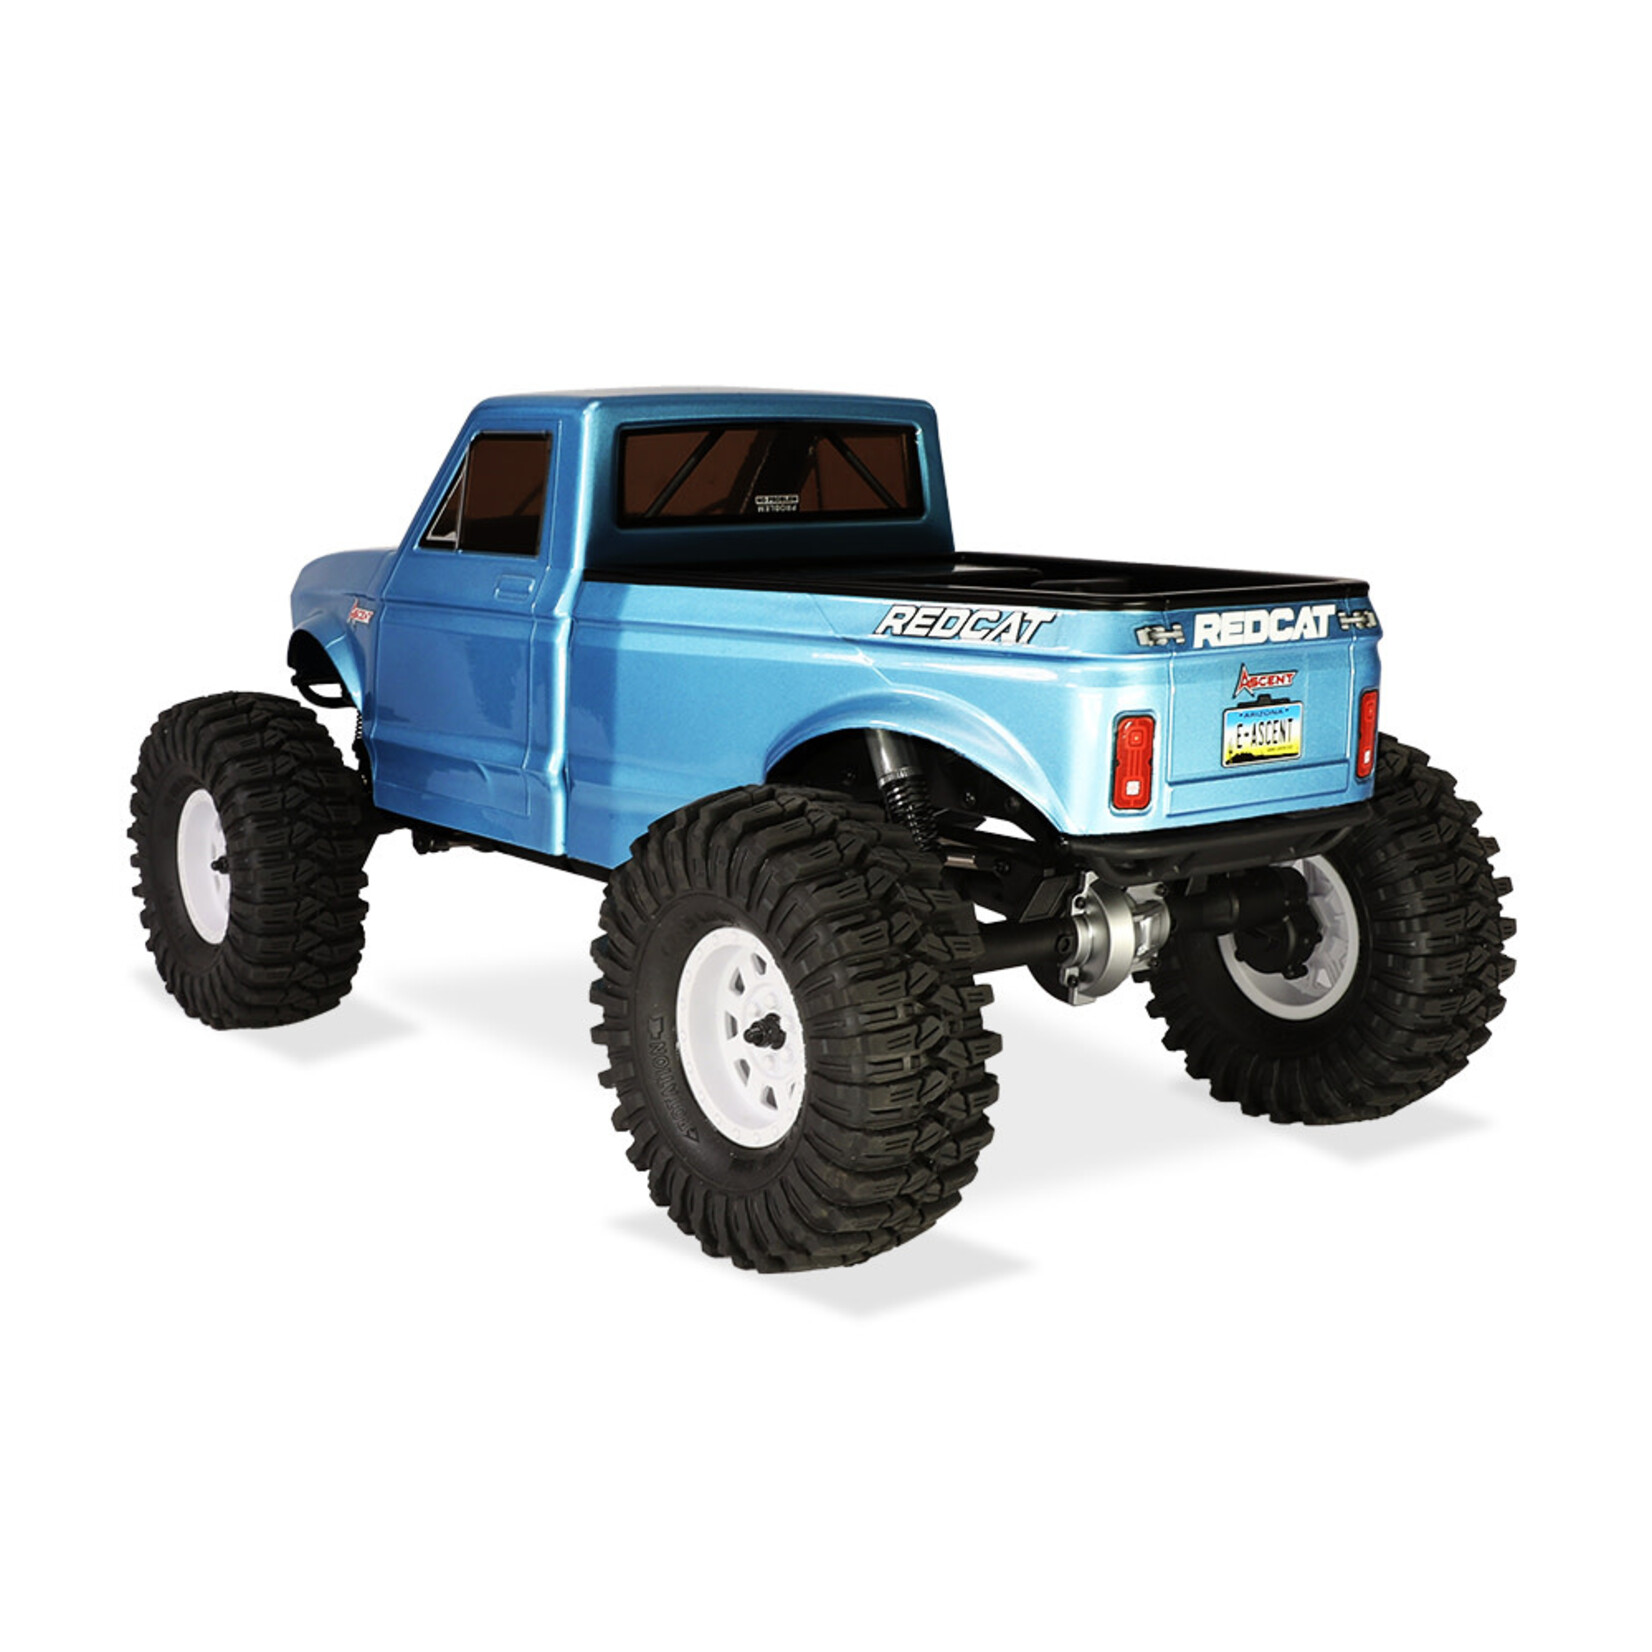 Redcat Racing Everest Ascent 1/10 Scale Crawler - BLUE